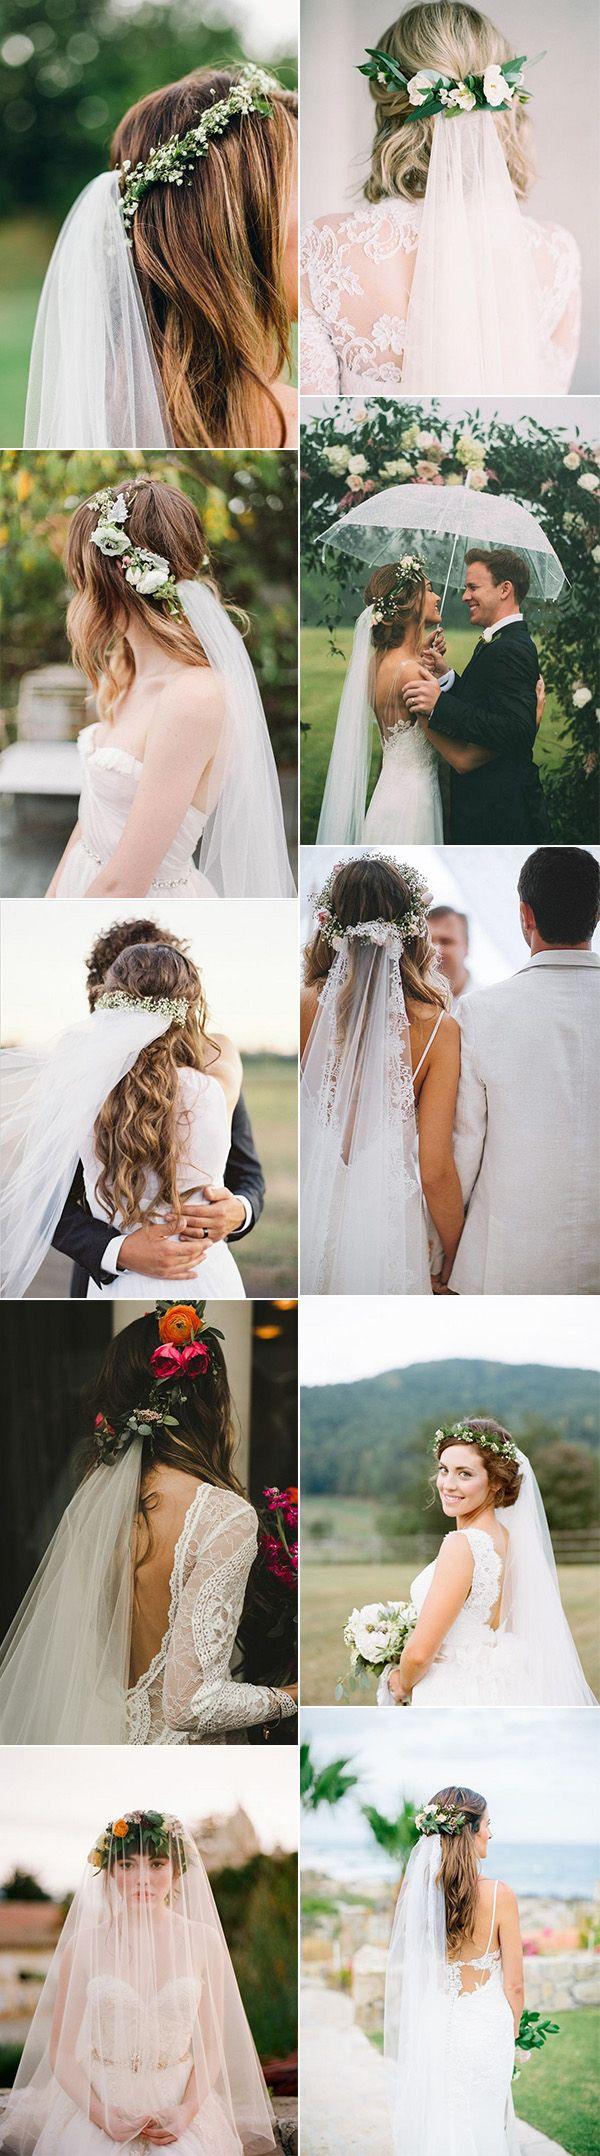 Wedding - Top 10 Wedding Hairstyles With Flower Crown Veil For 2018